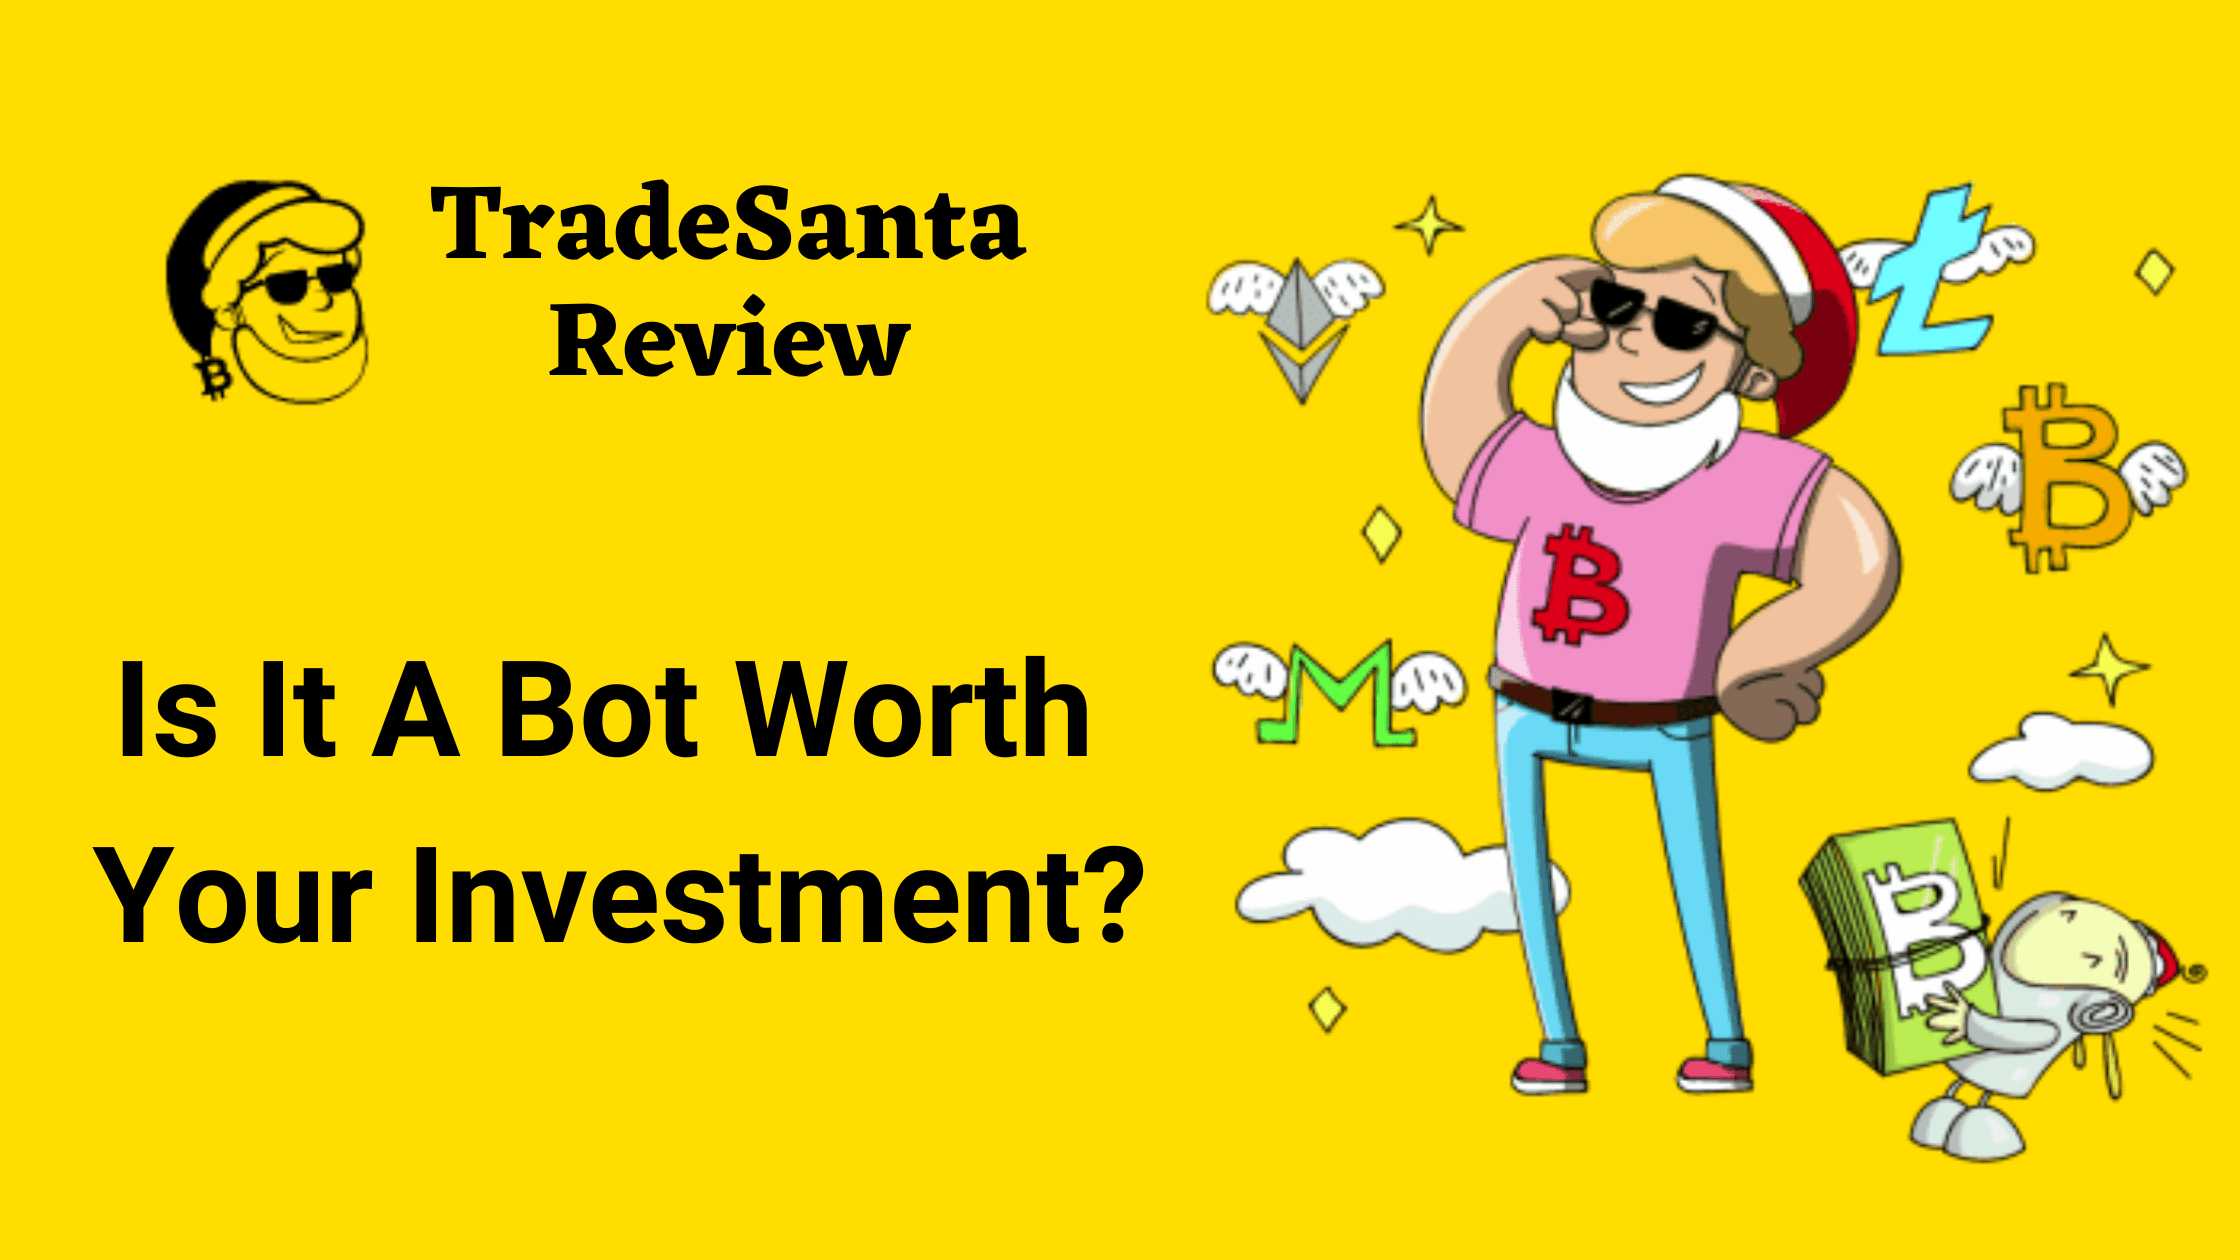 TradeSanta Review - Featured Image